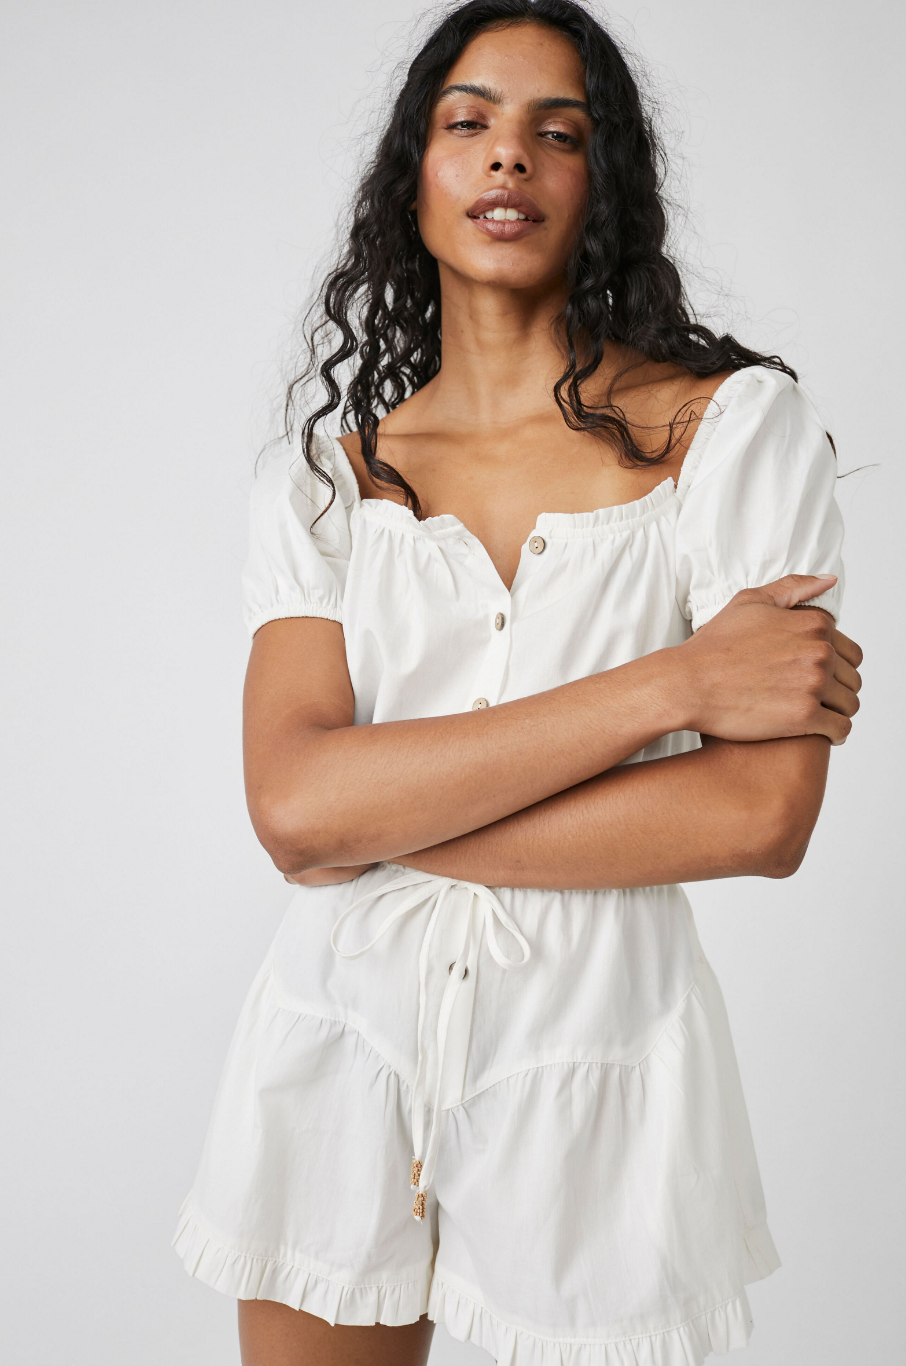 FREE PEOPLE A SIGHT FOR SORE EYES ROMPER IN IVORY